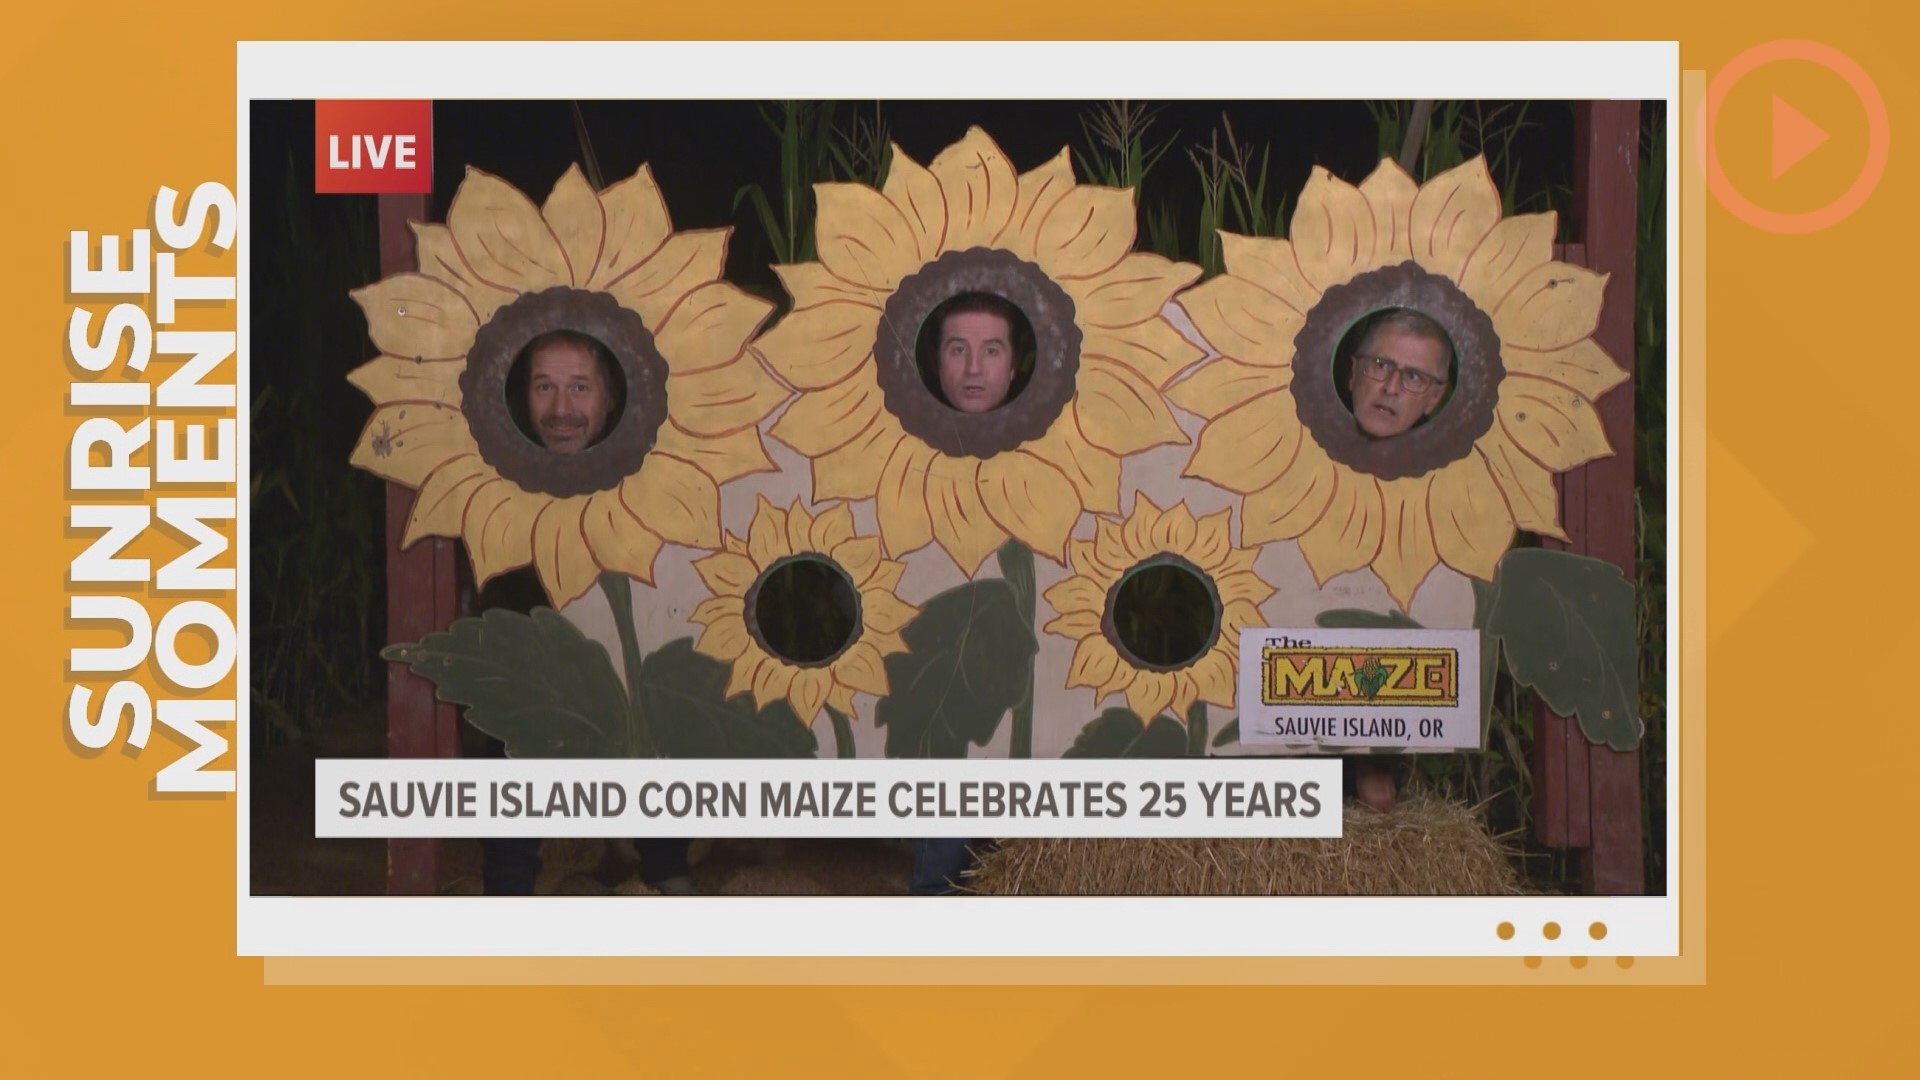 KGW Sunrise looks back at some of the lighter moments of the week including a trip to a corn maze on Sauvie Island.